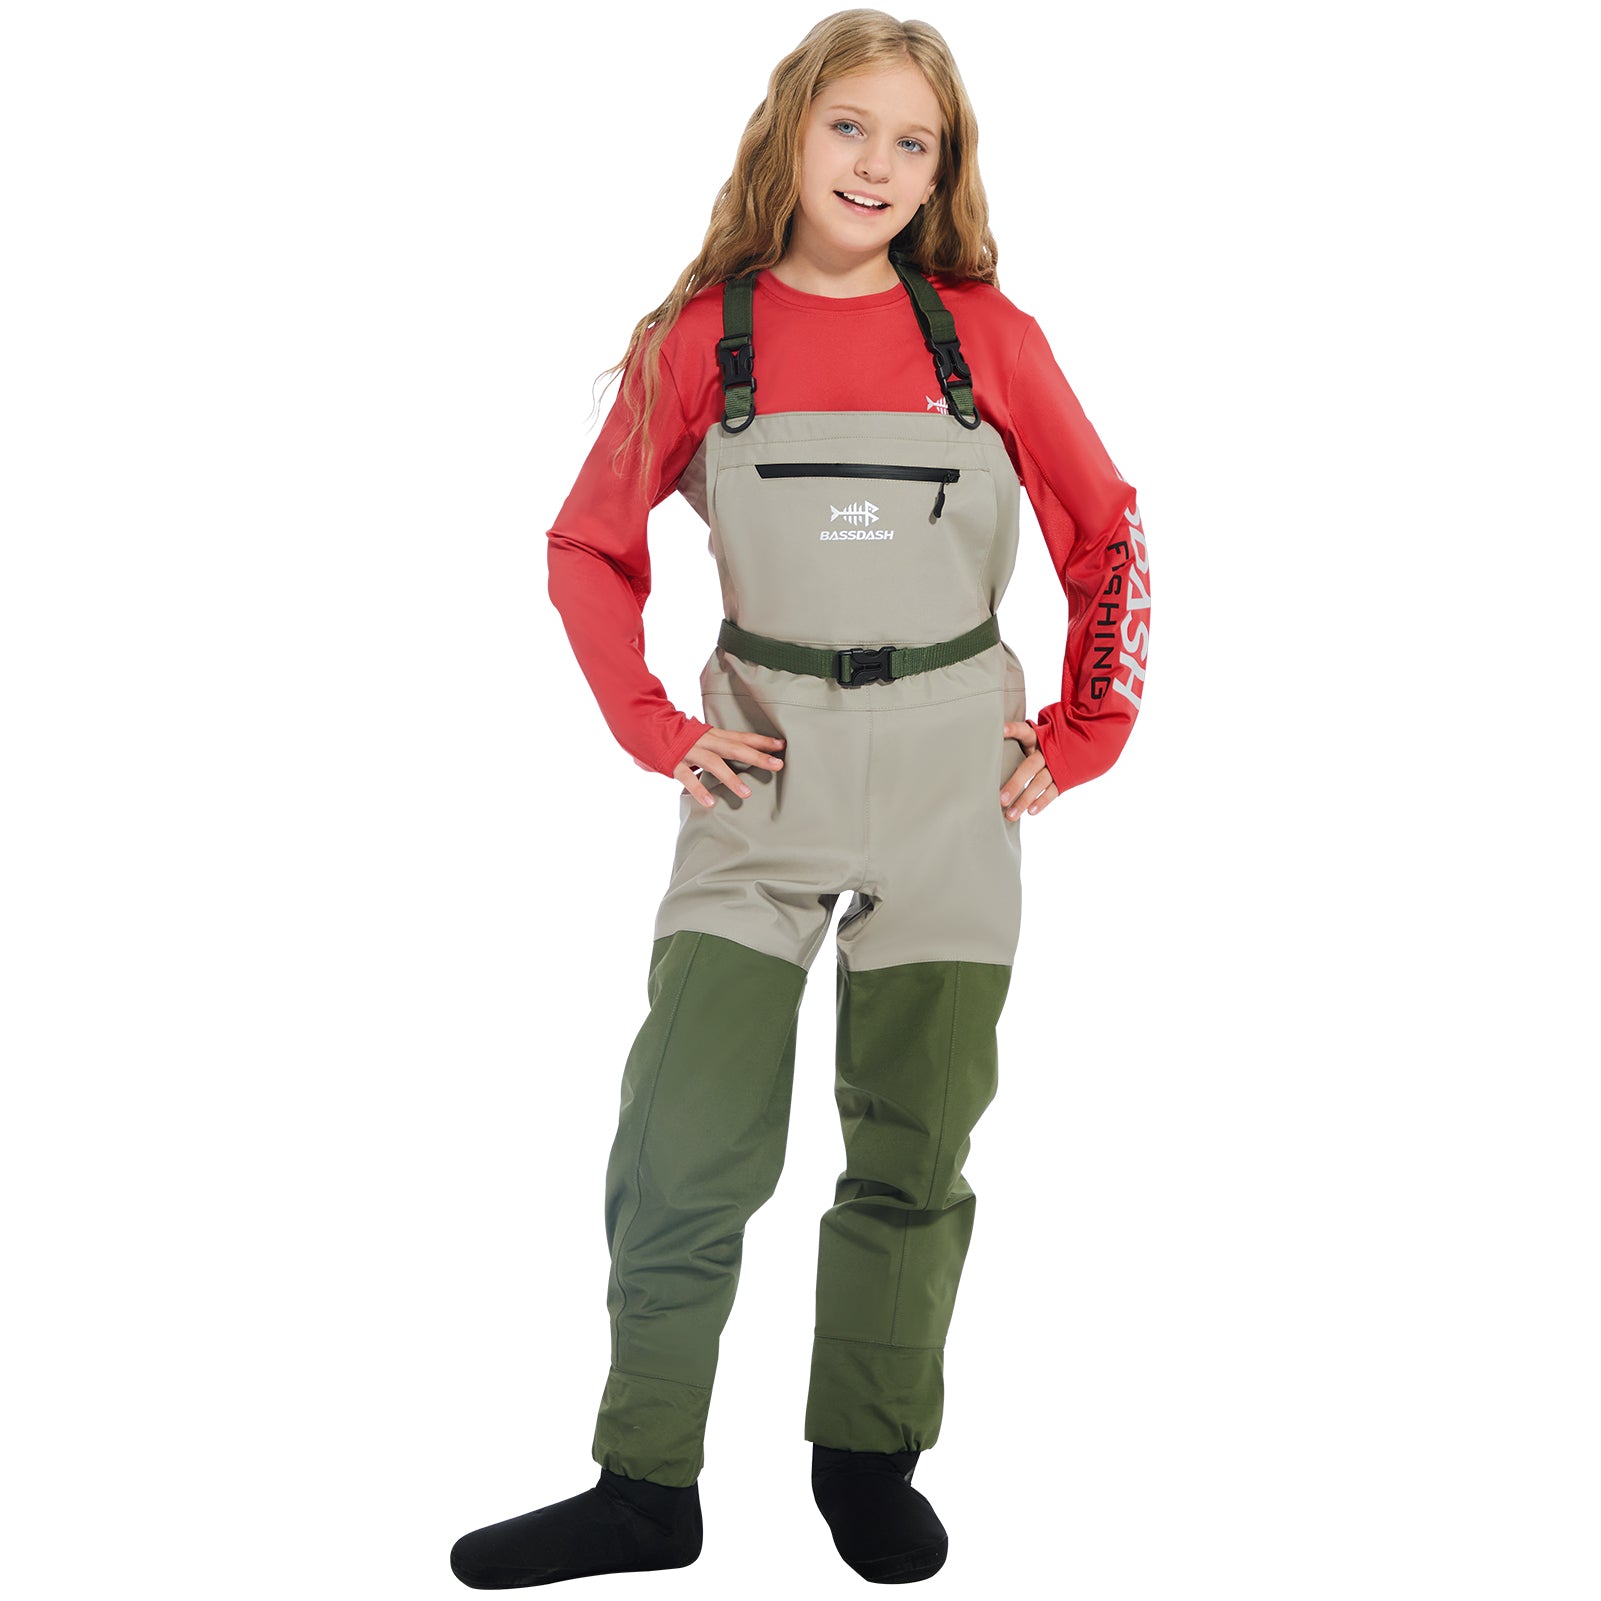 IMMERSE Breathable Youth Fishing Waders - Stocking Foot